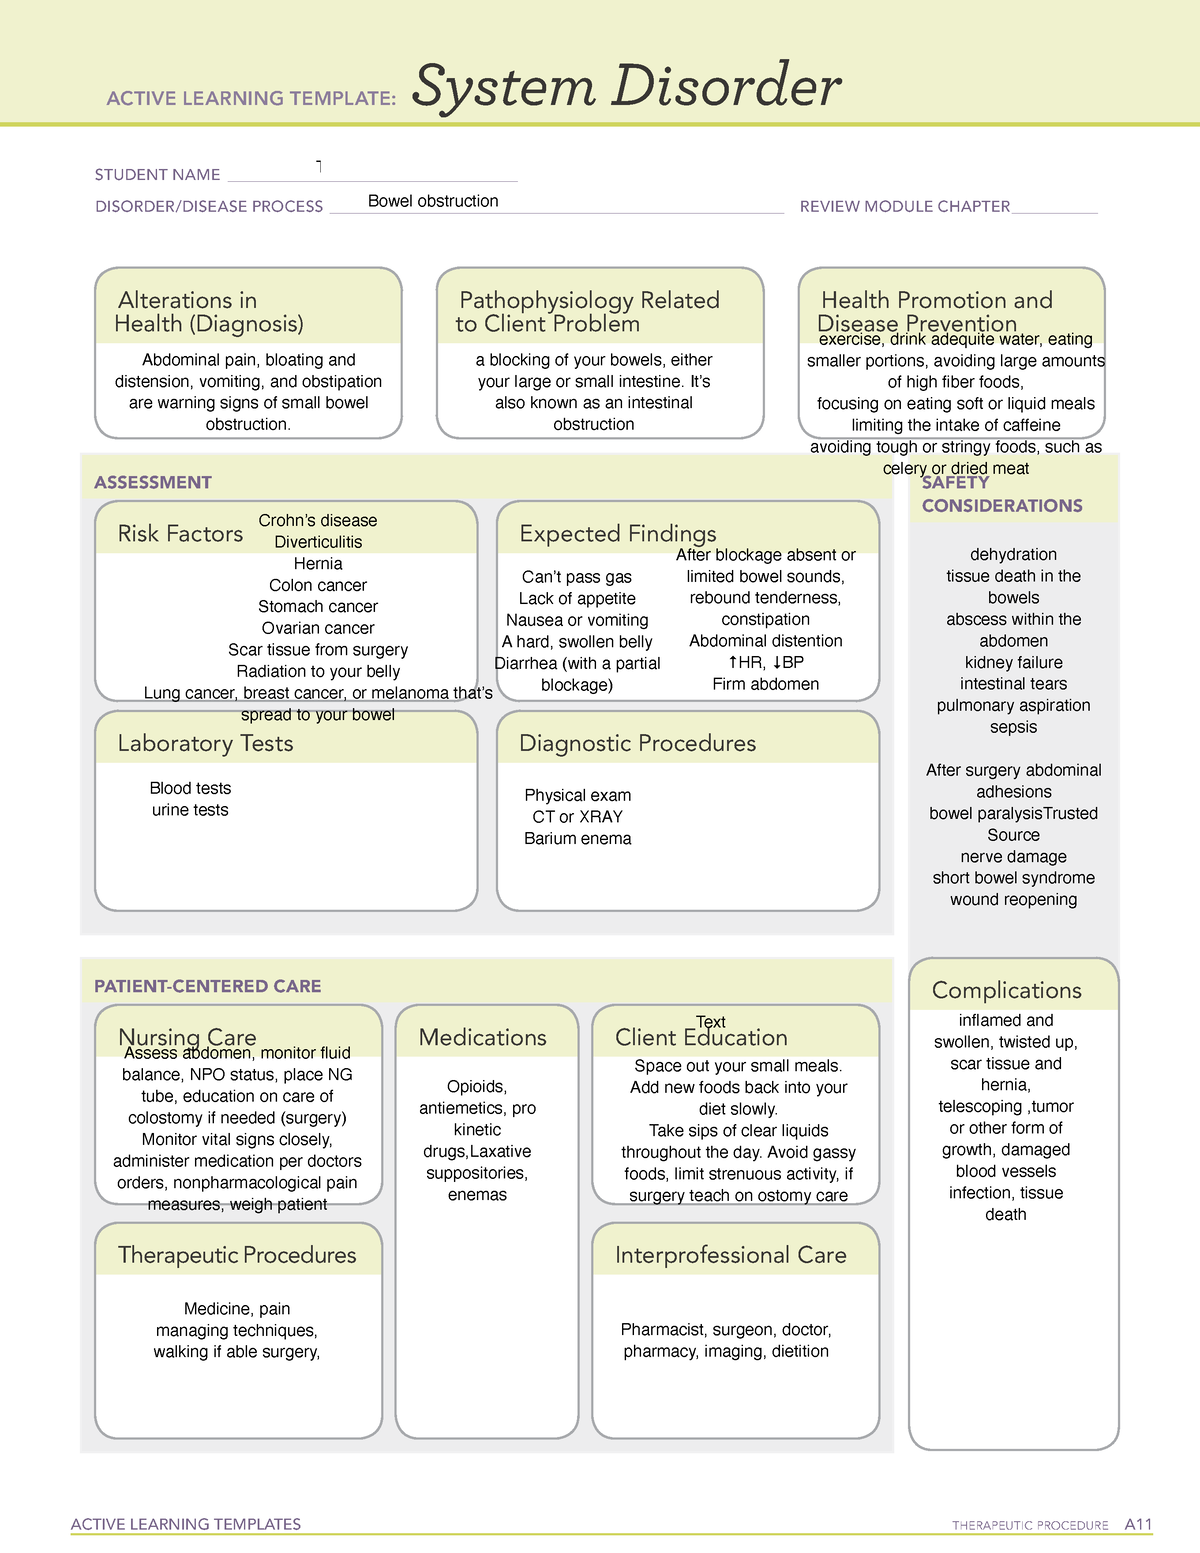 Active Learning Template sys Dis ACTIVE LEARNING TEMPLATES